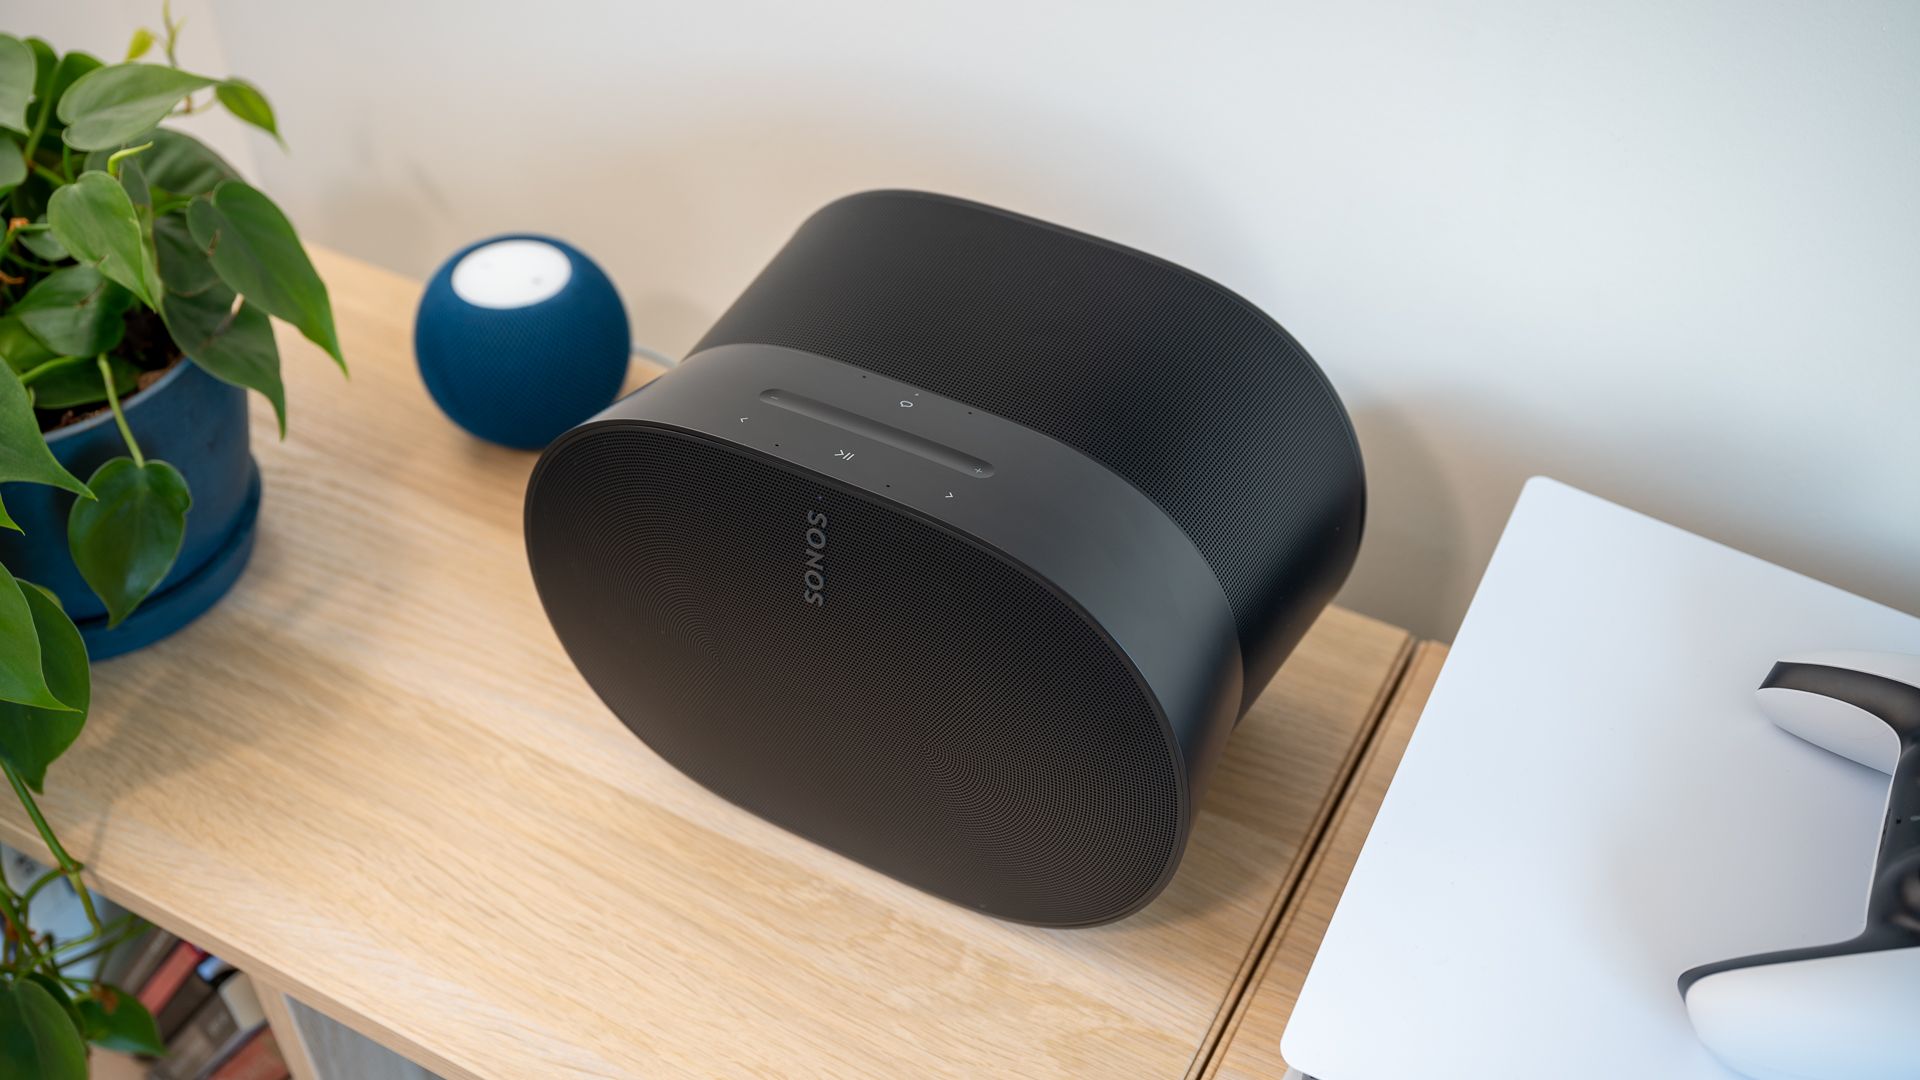 Top of the Sonos Era 300 and its touch controls